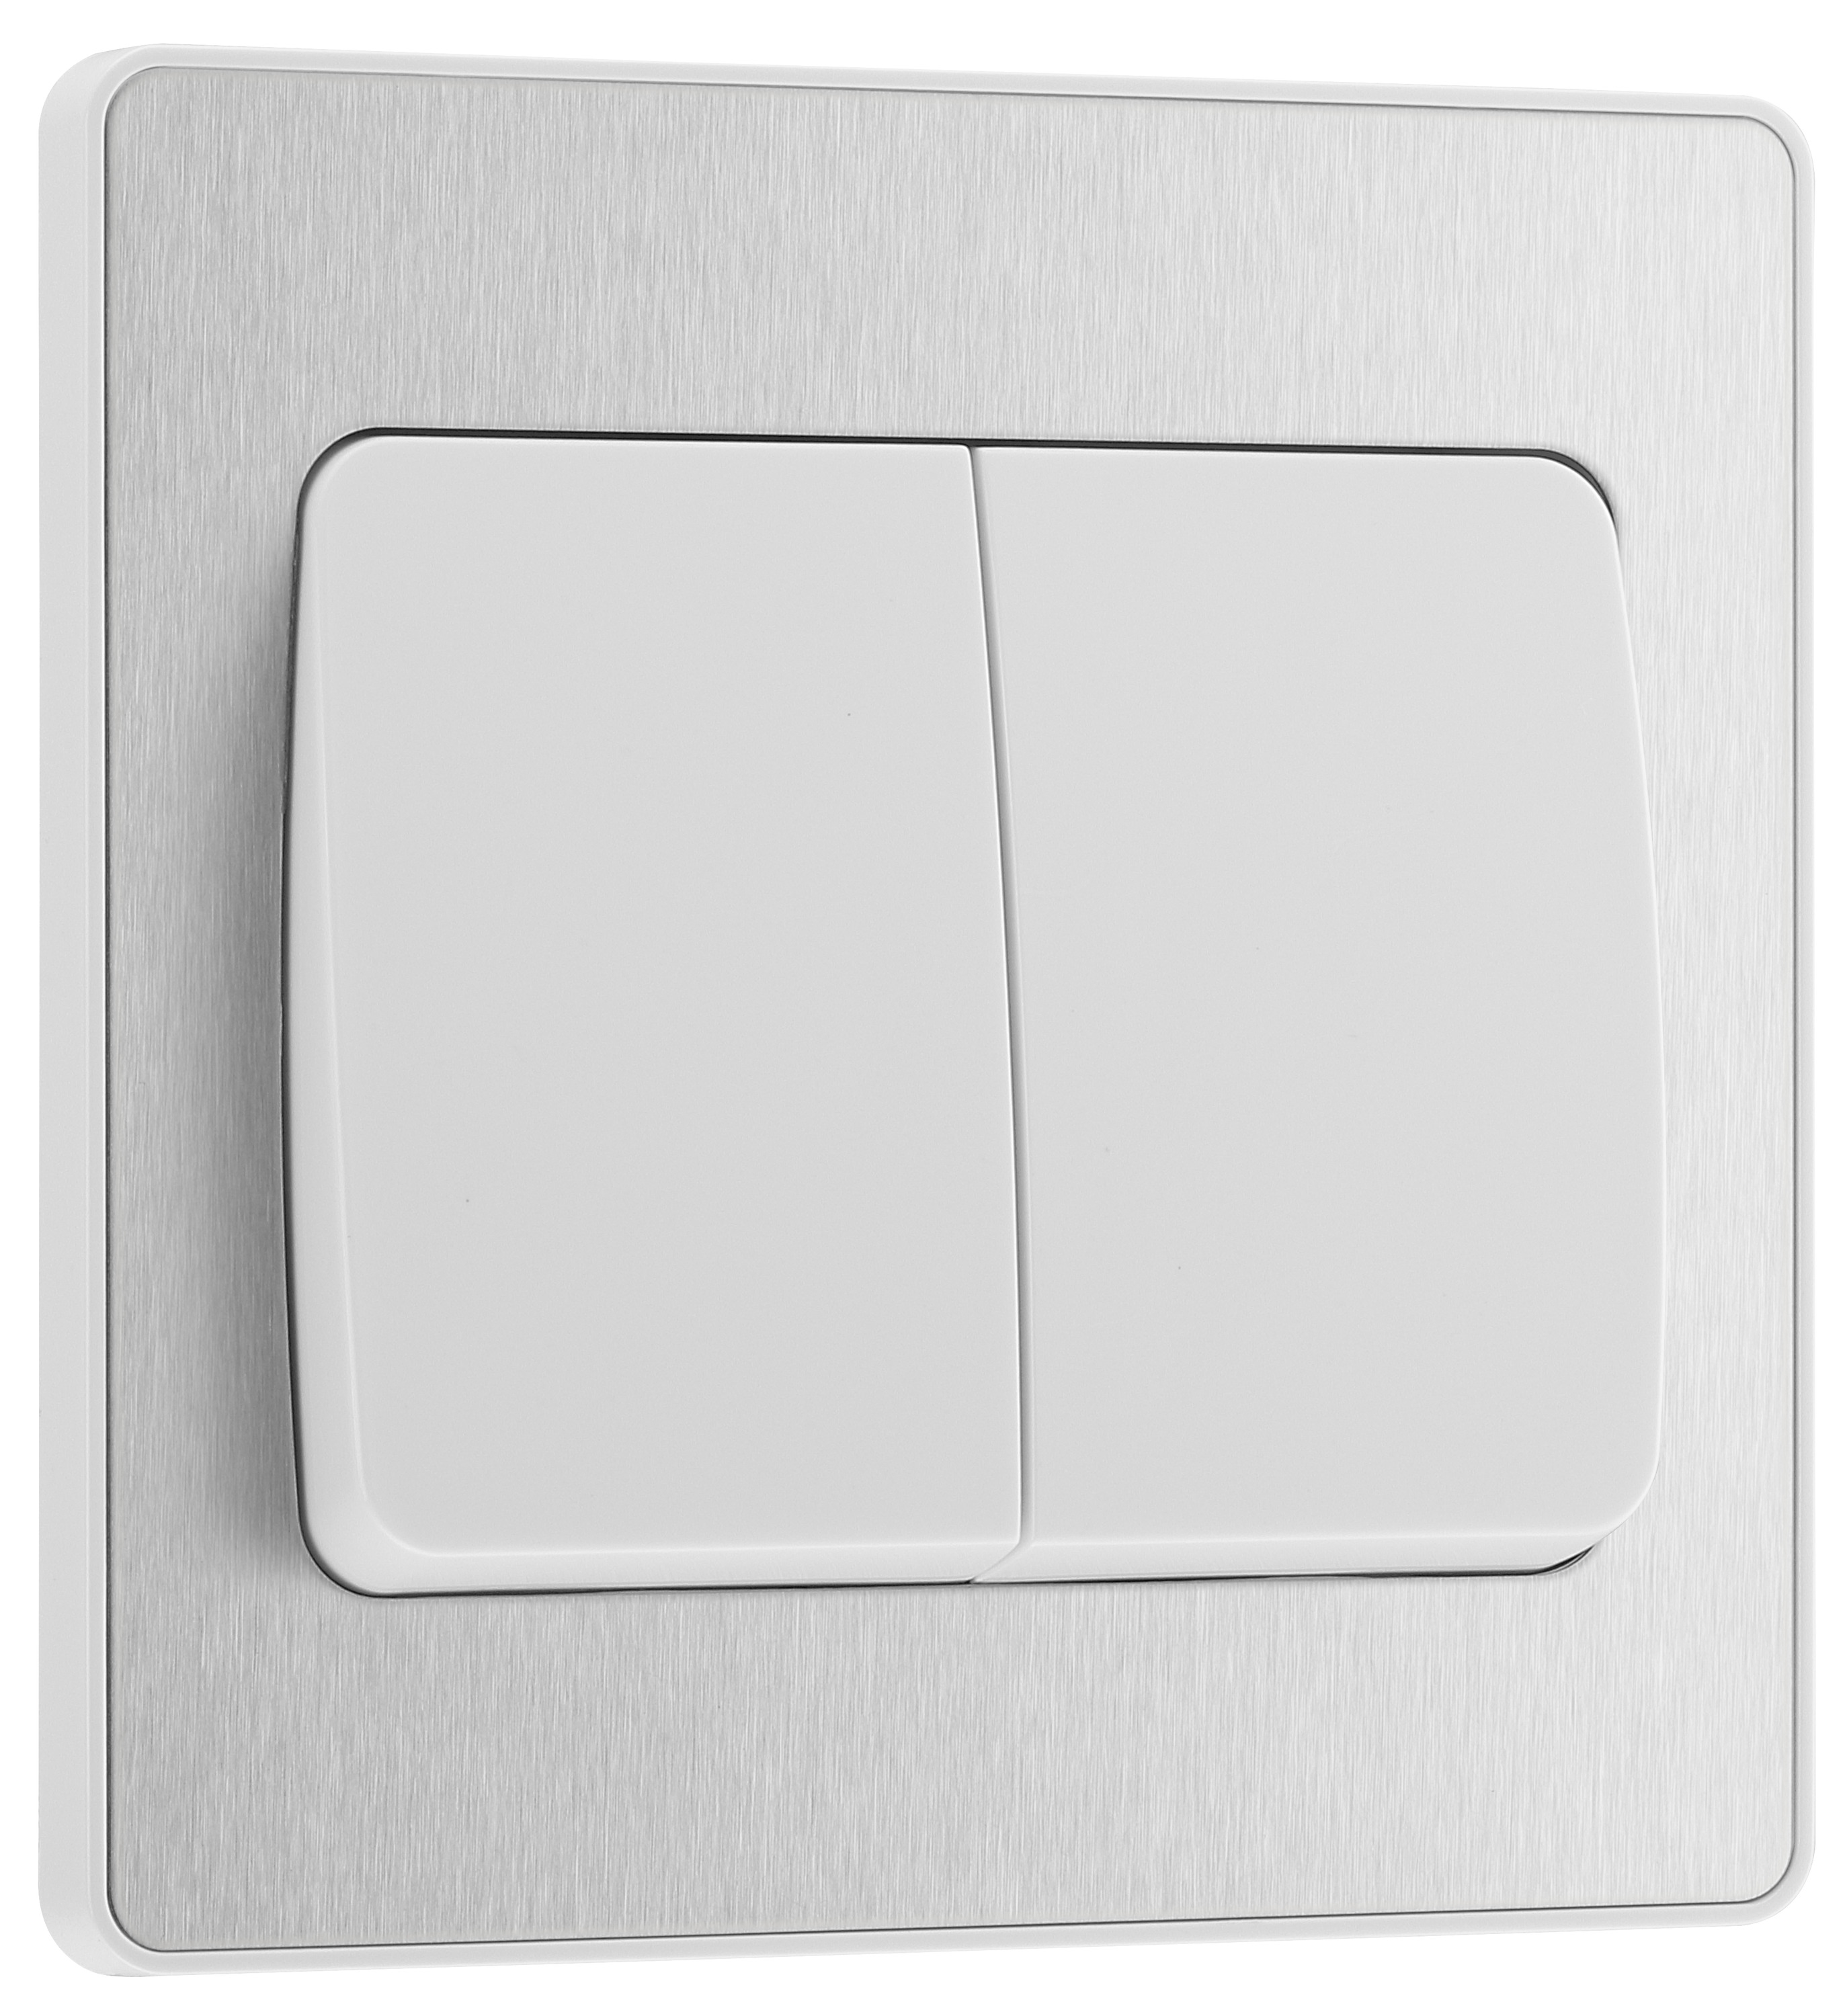 Image of BG Evolve Brushed Steel 20A 16Ax Wide Rocker Double Light Switch - 2 Way